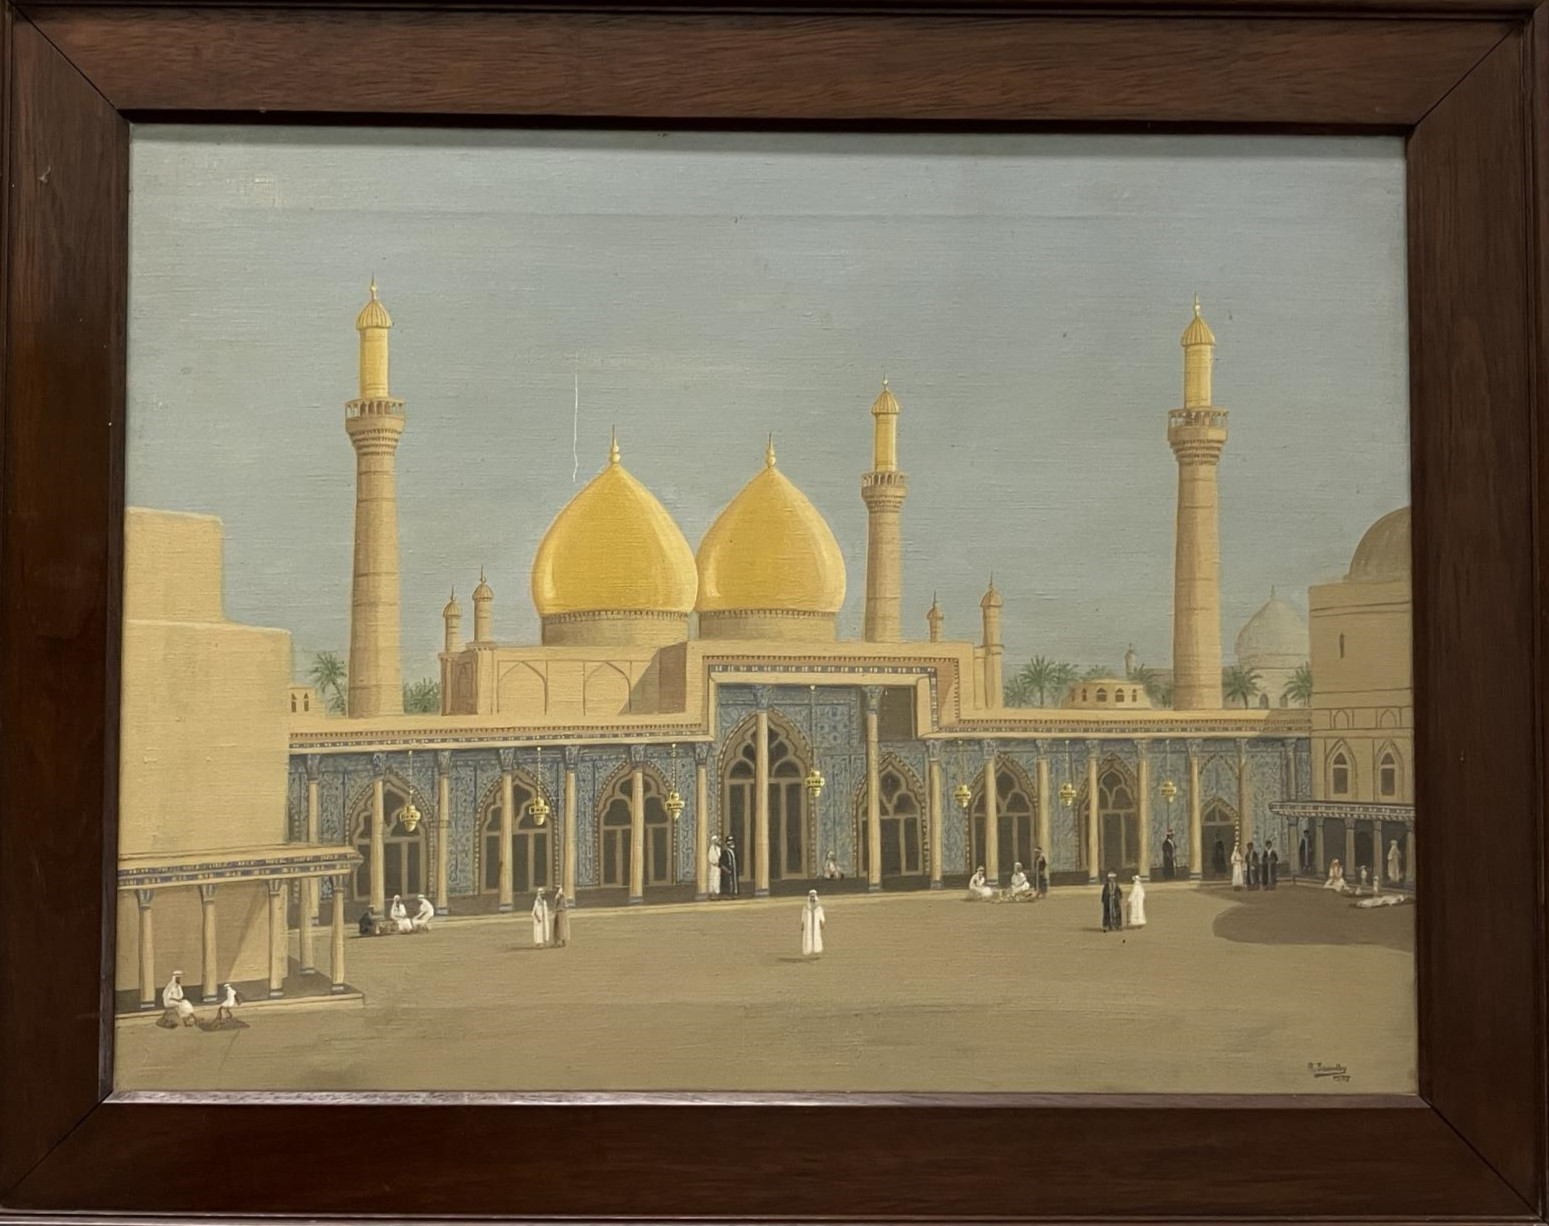 Robert Saundby, a mosque, oil on canvas, signed and dated 1937, 44.5 x 60 cm